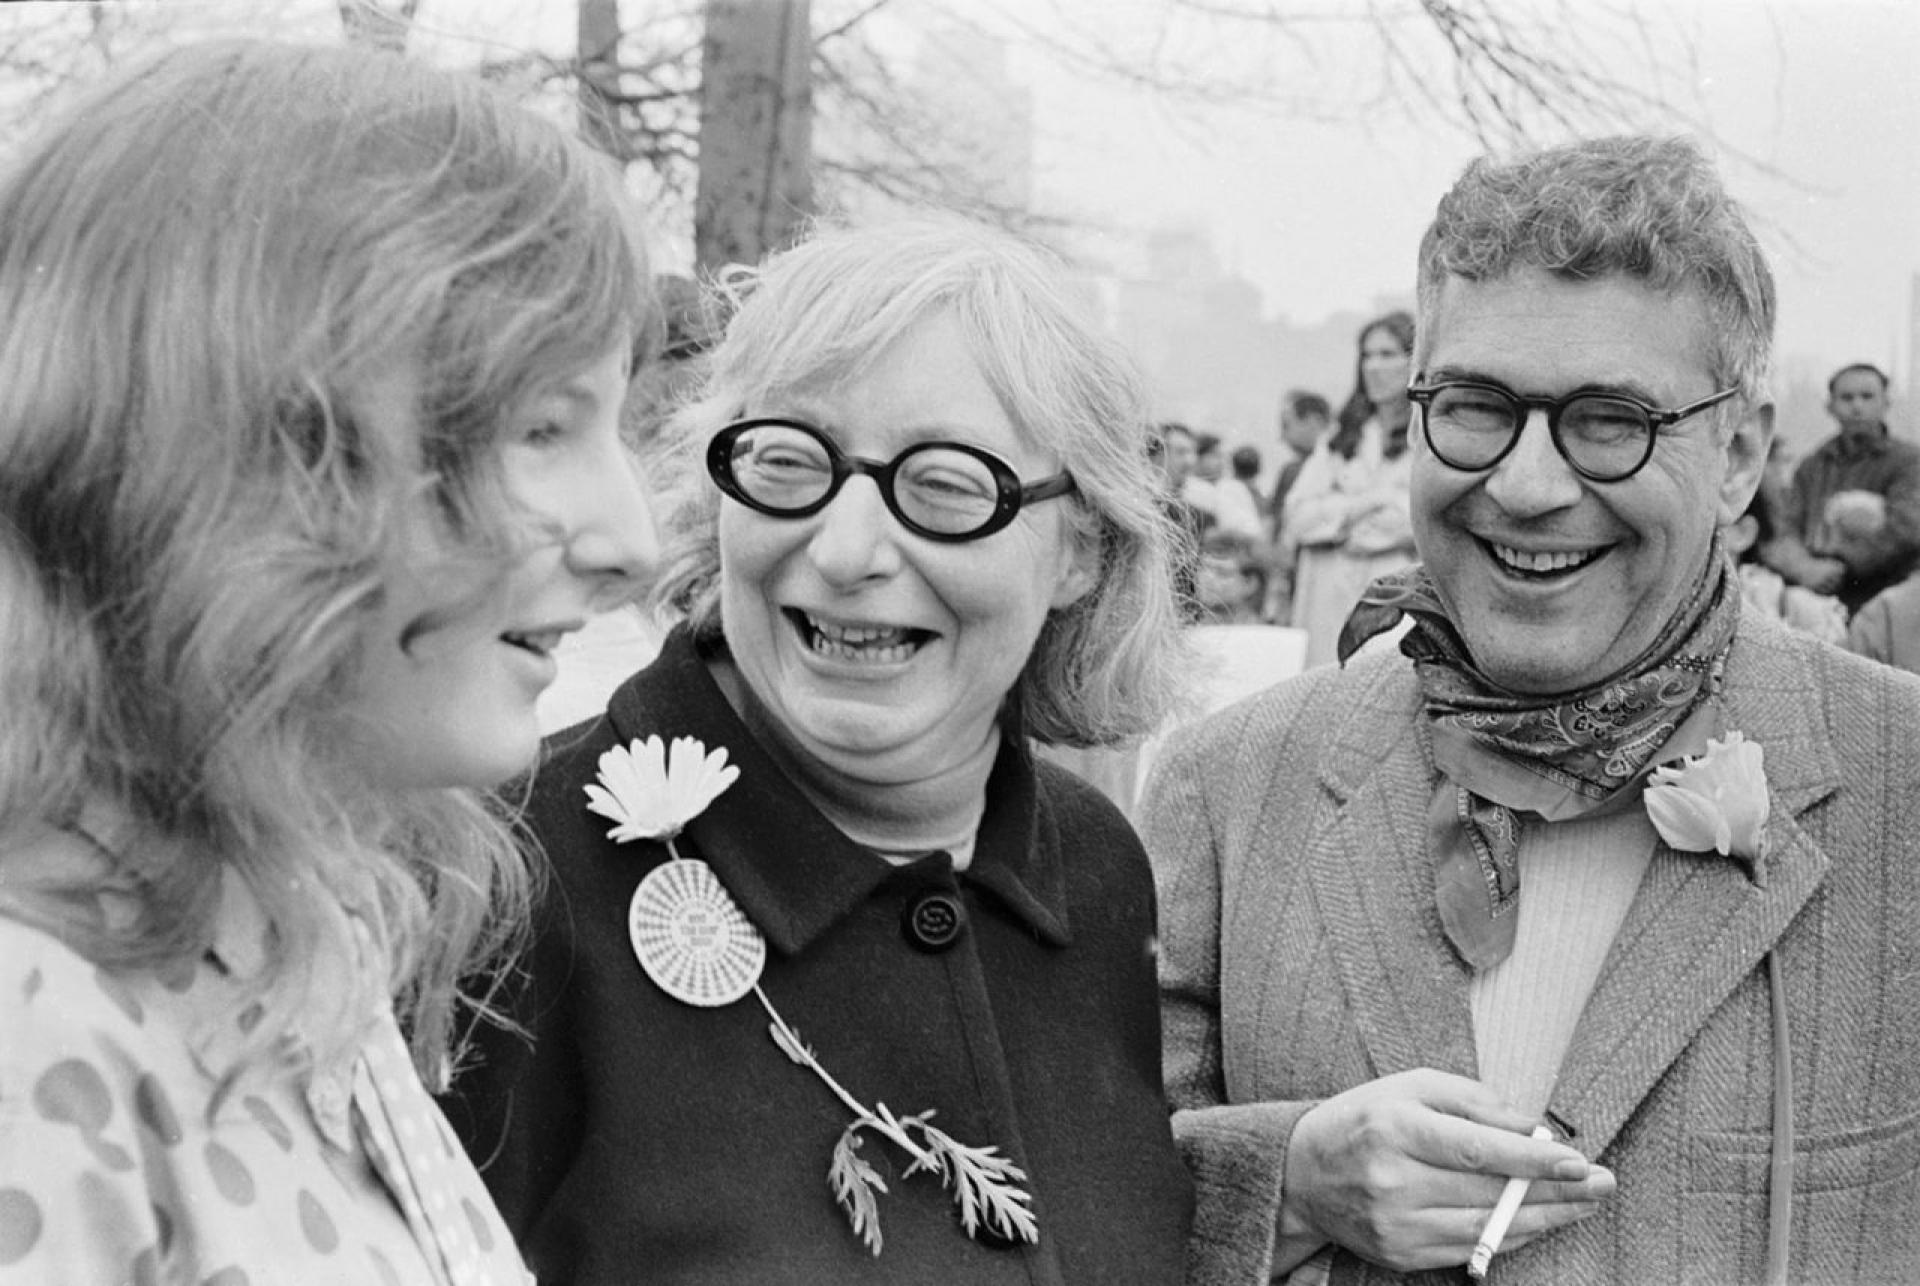 “Citizen Jane” was known for organizing grassroots efforts to block urban-renewal projects that would have destroyed local neighborhoods. | Photo by Fred W. McDarrah/ Getty Images